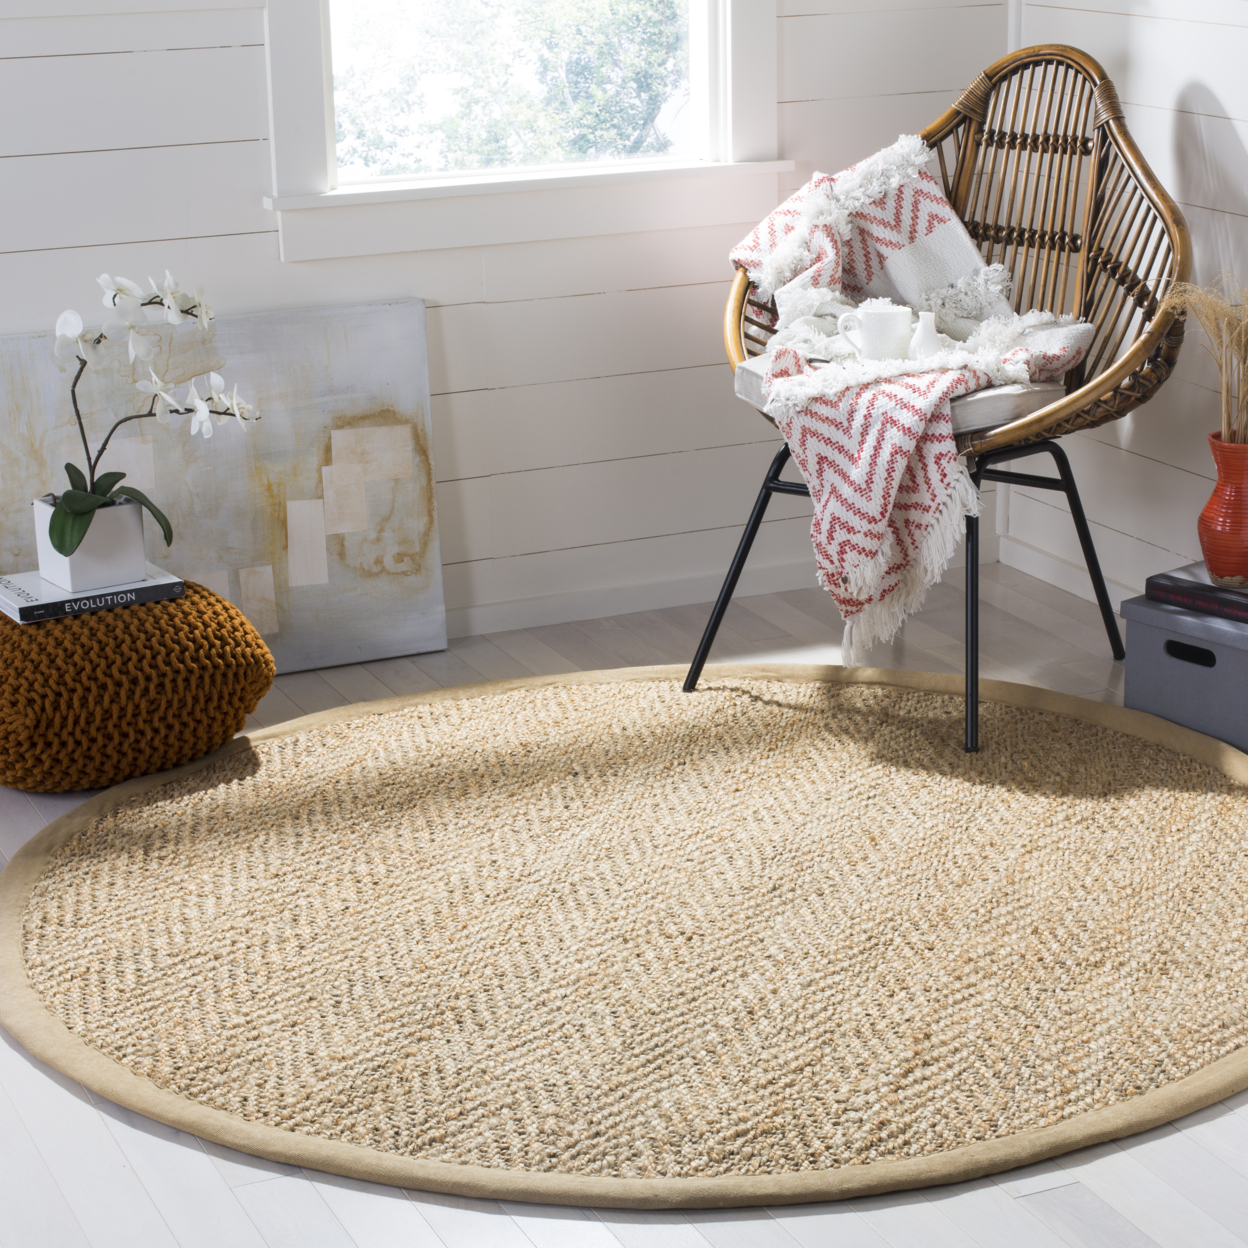 SAFAVIEH Natural Fiber Collection NF263A Natural Rug - 6' Round